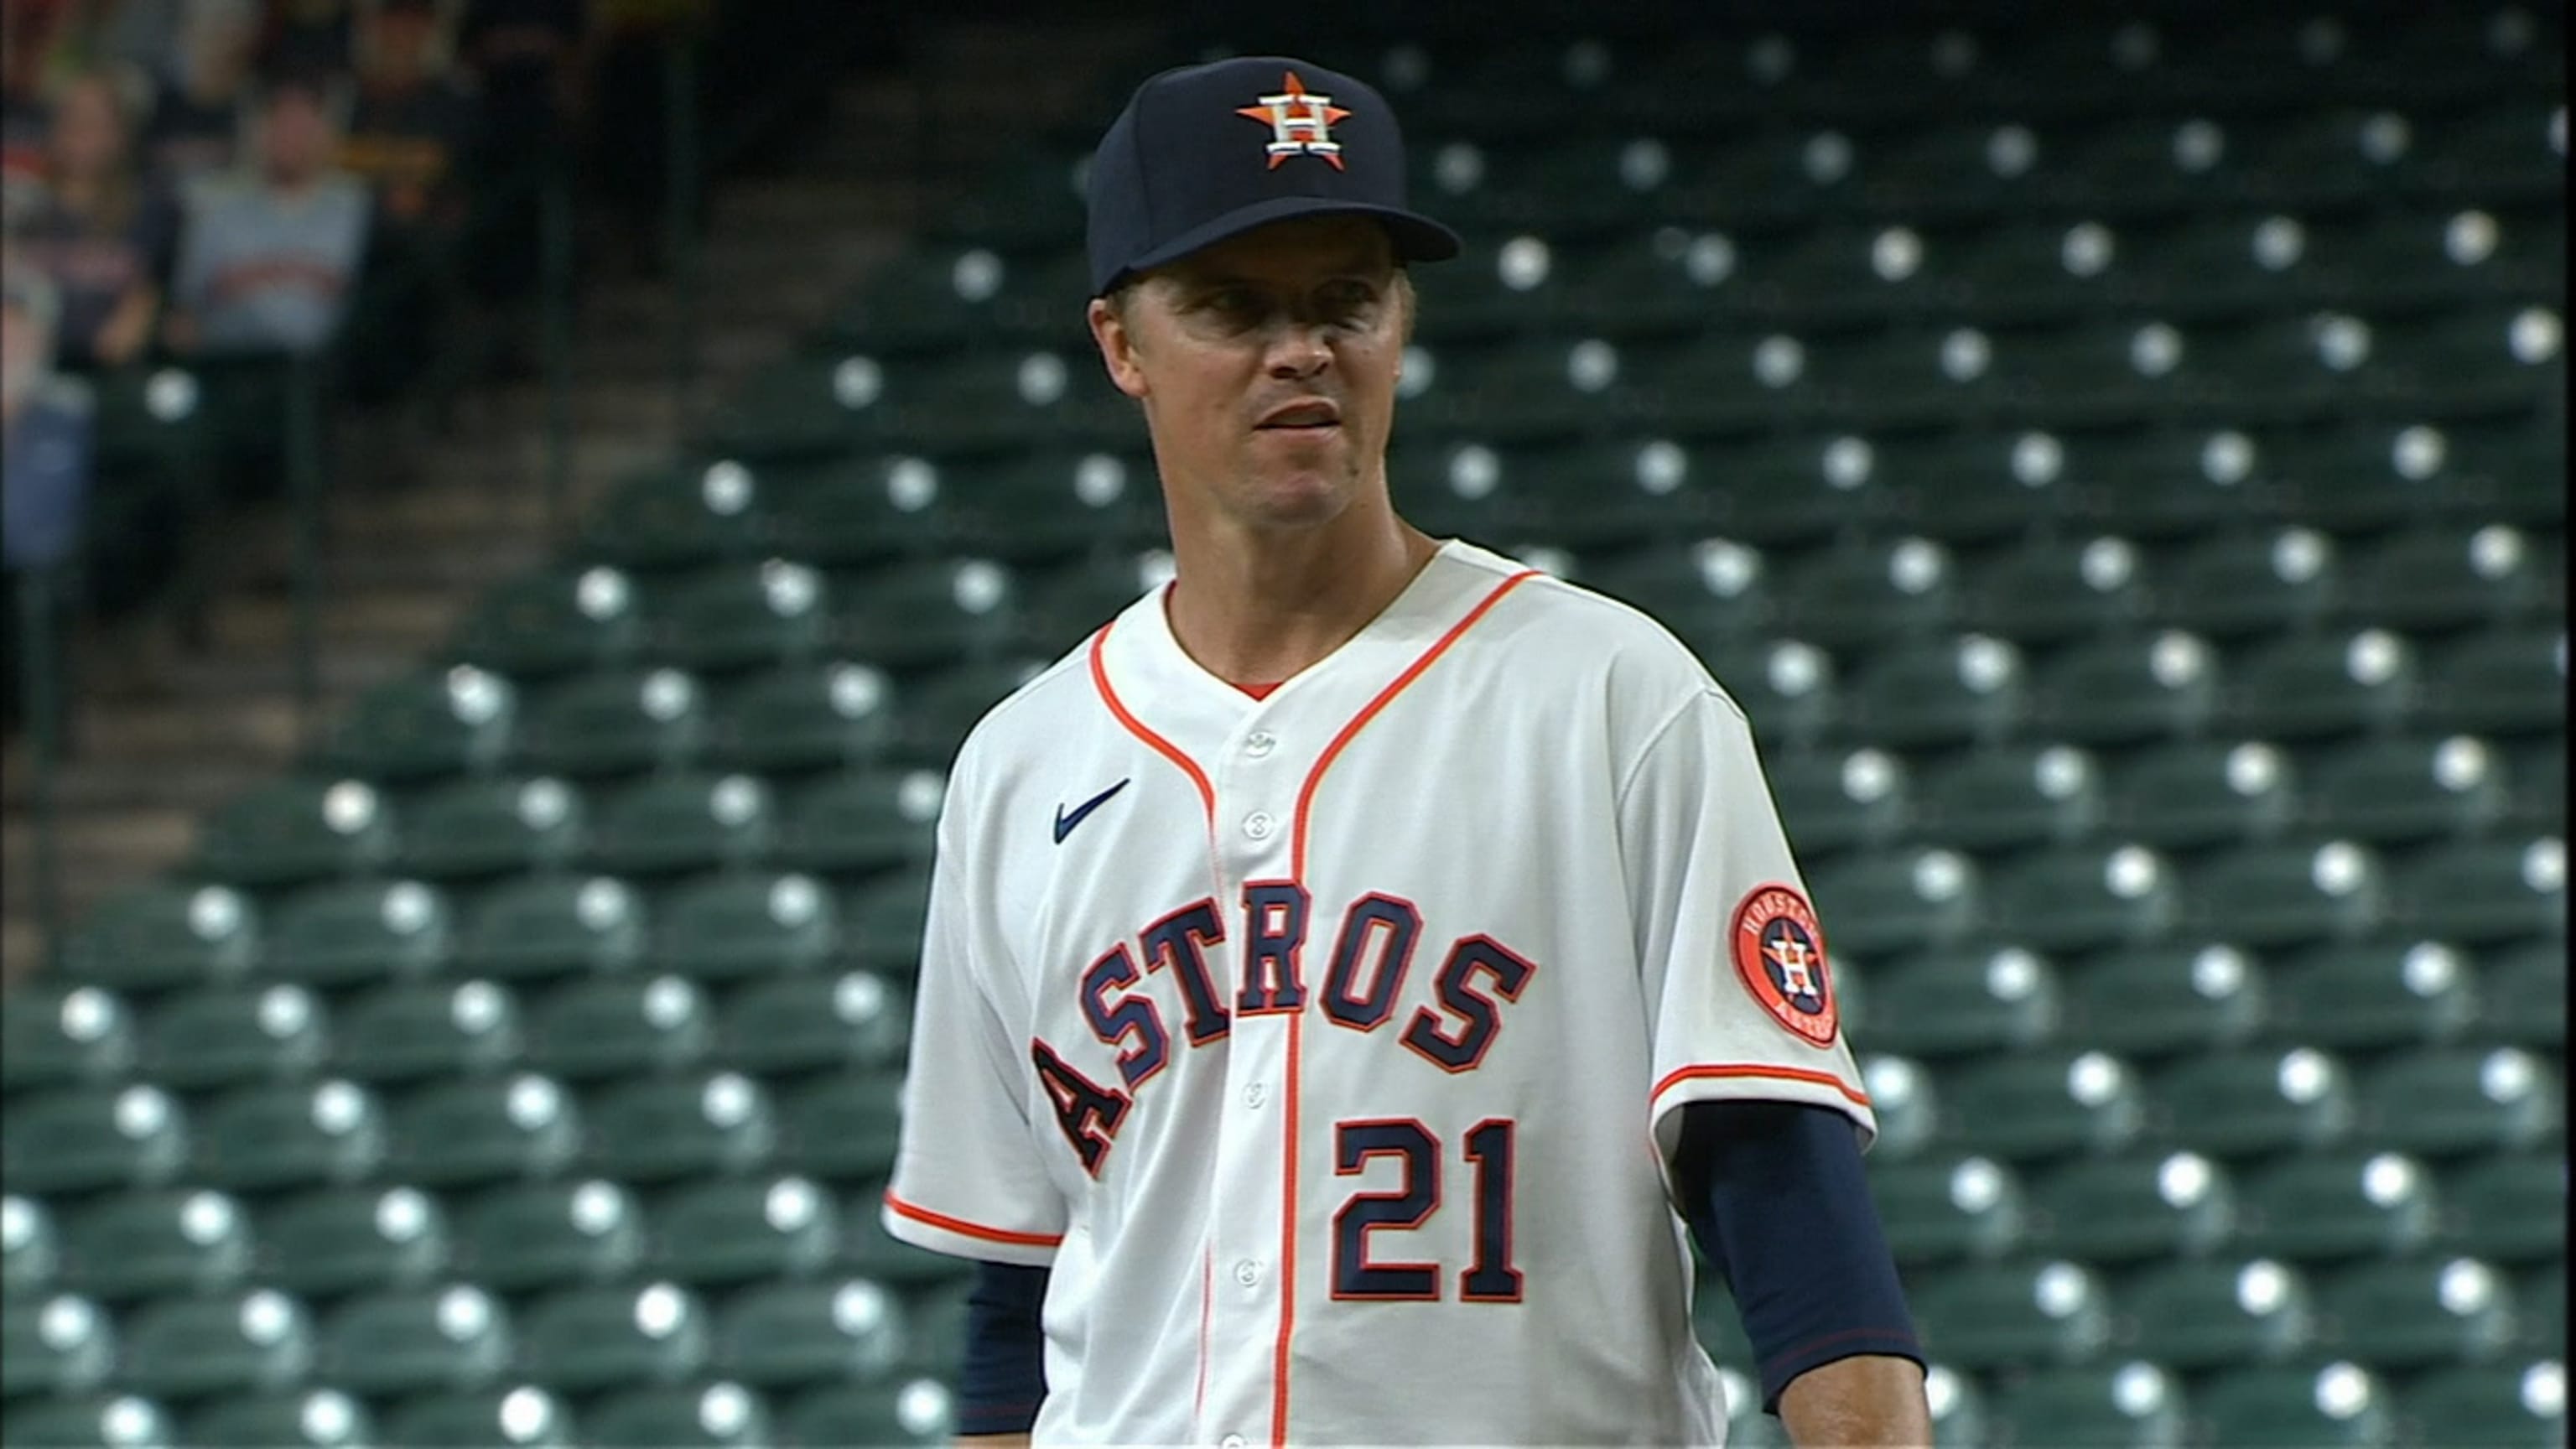 Zack Greinke hilariously not recognized at Astros MLB playoff game after  going full dad mode